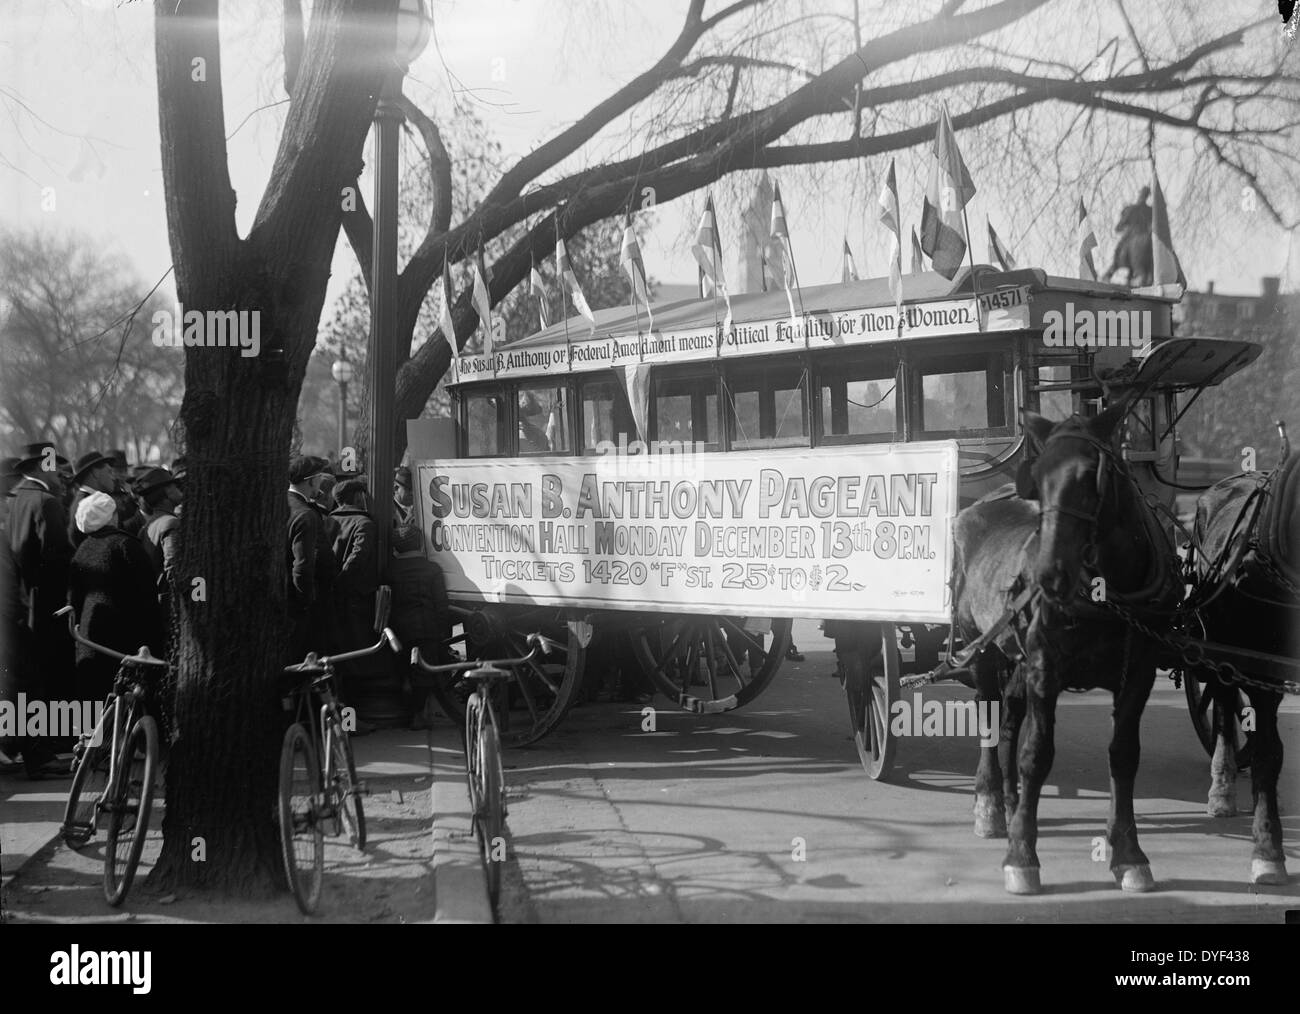 Street Car in the Susan B. Anthony Pageant Stock Photo